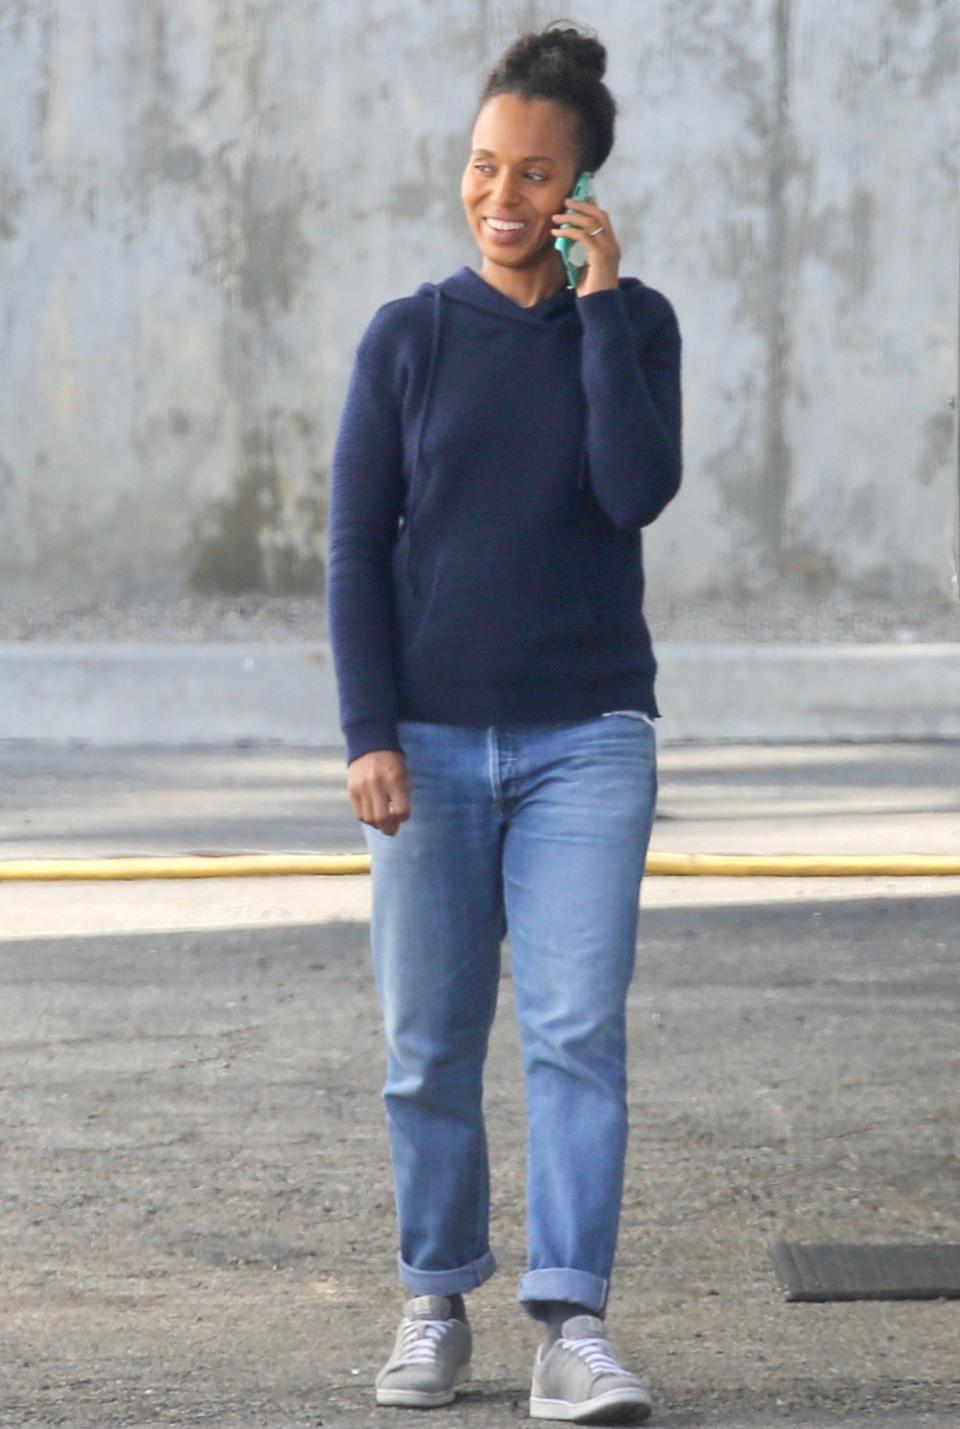 A casual Kerry Washington arrives to the set of <em>Little Fires Everywhere</em> in L.A. on Thursday.